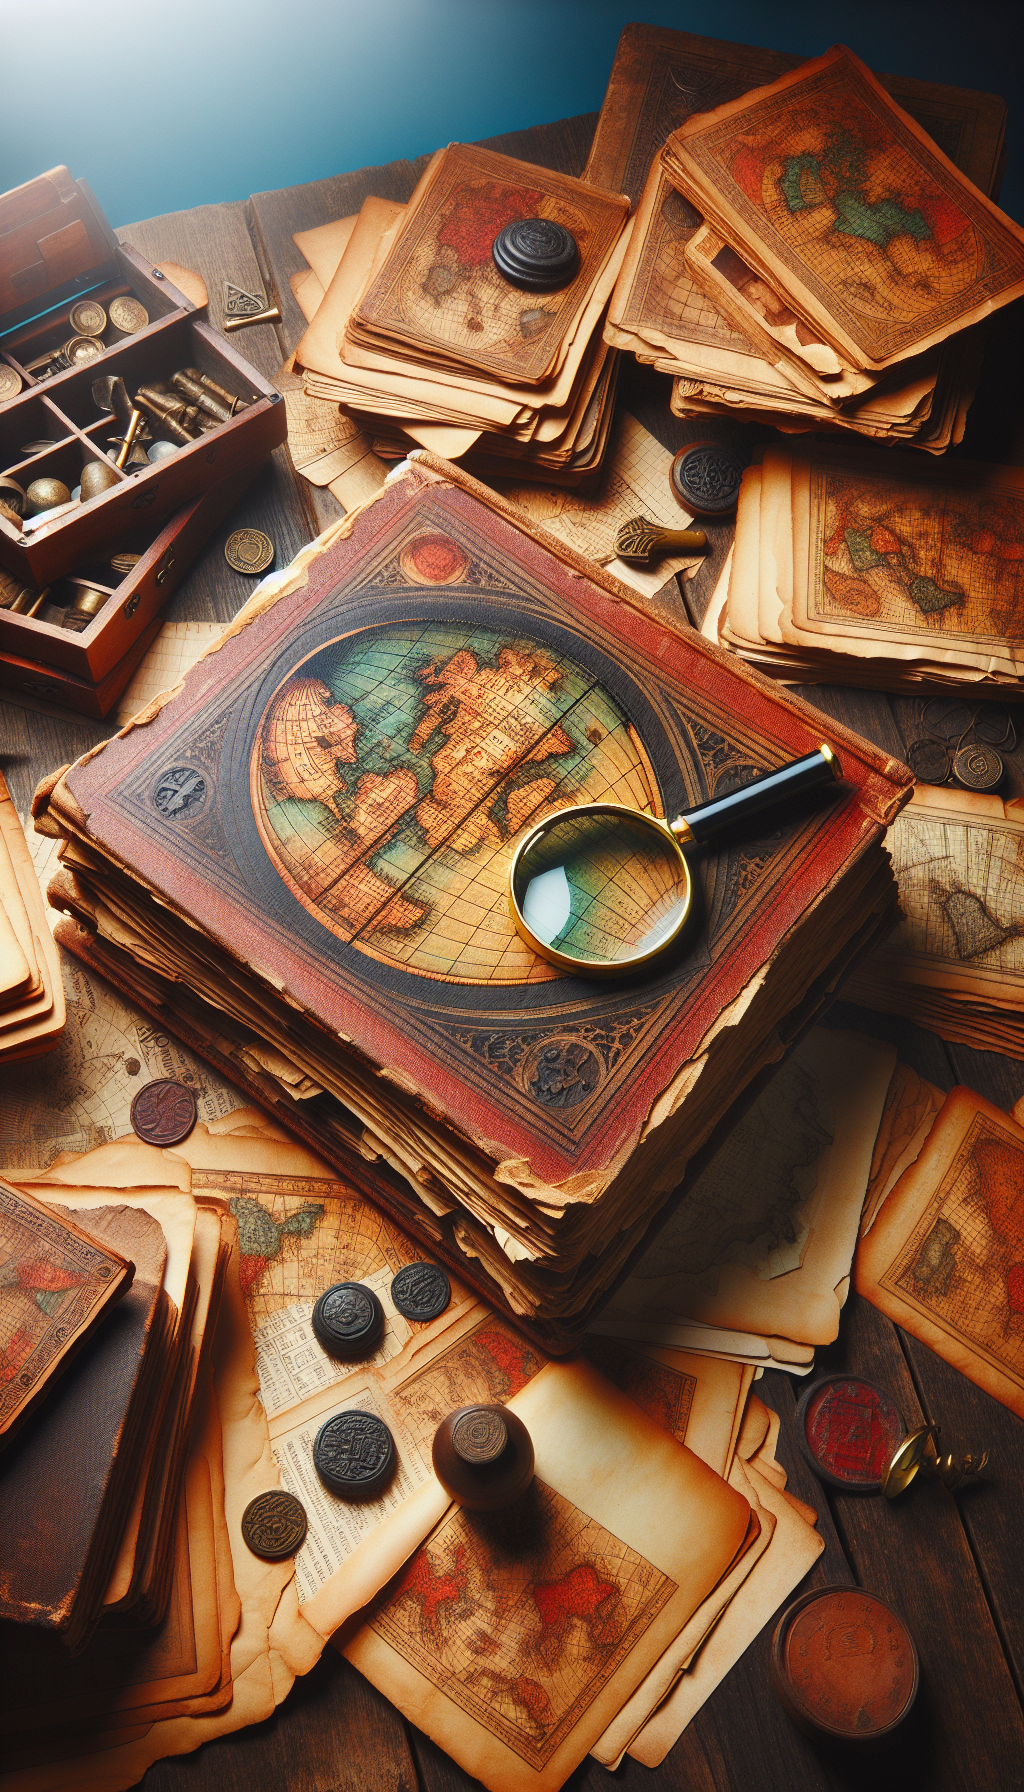 An antique wooden desk scattered with various open aged National Geographic magazines, their sepia-toned pages forming a map of the world. A magnifying glass hovers over an issue, transforming the page beneath into a vivid, colorful scene, symbolizing the richness of history held within. Around the desk, treasures like old coins and artifacts hint at the value of these chronicles.